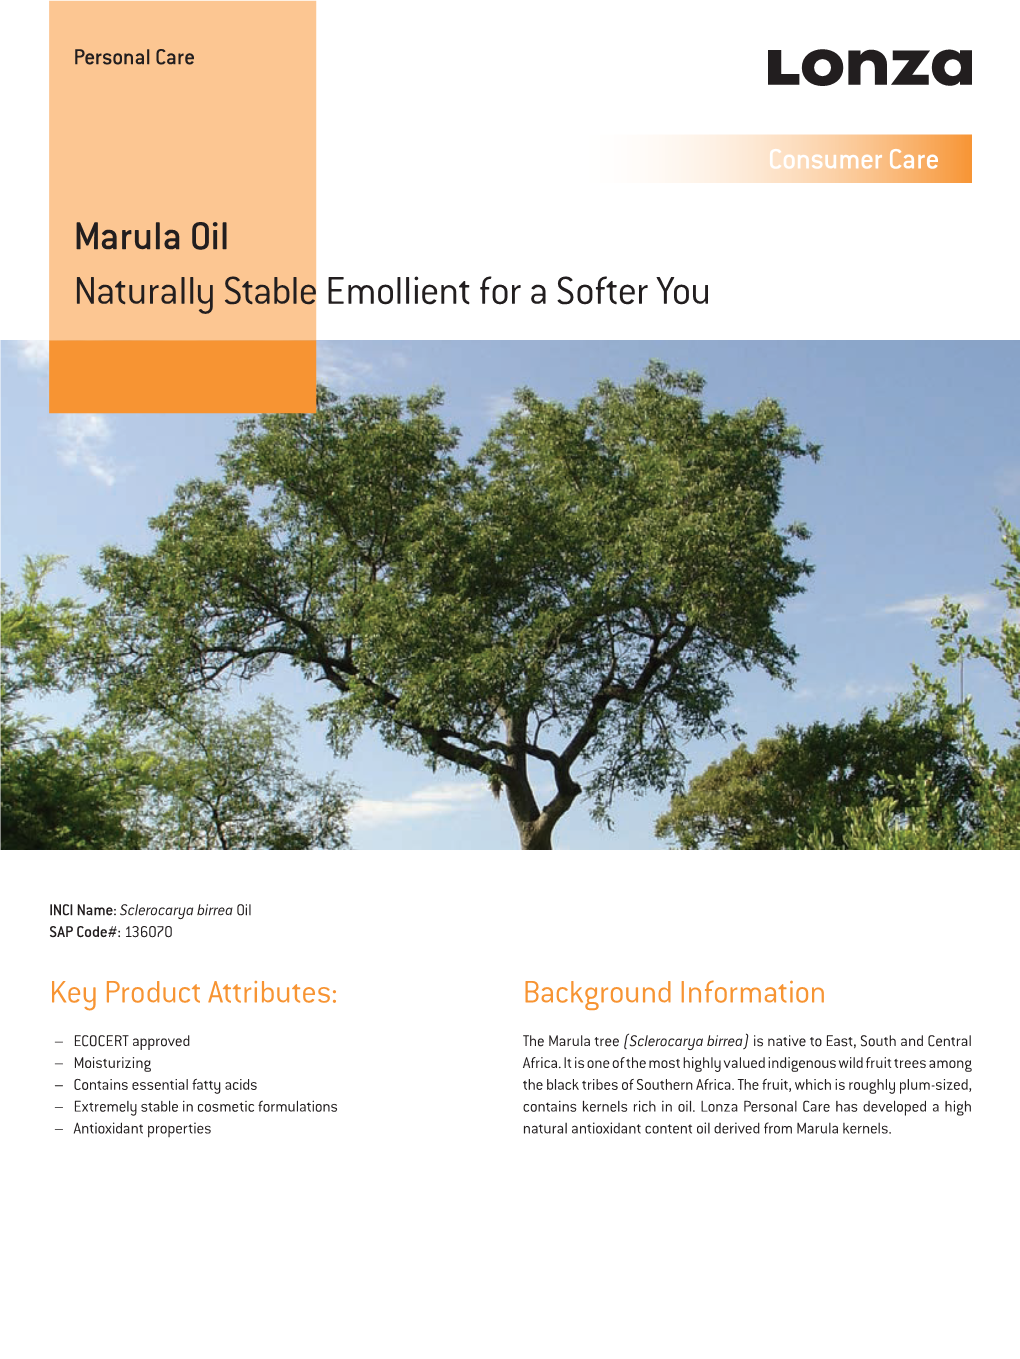 Marula Oil Naturally Stable Emollient for a Softer You